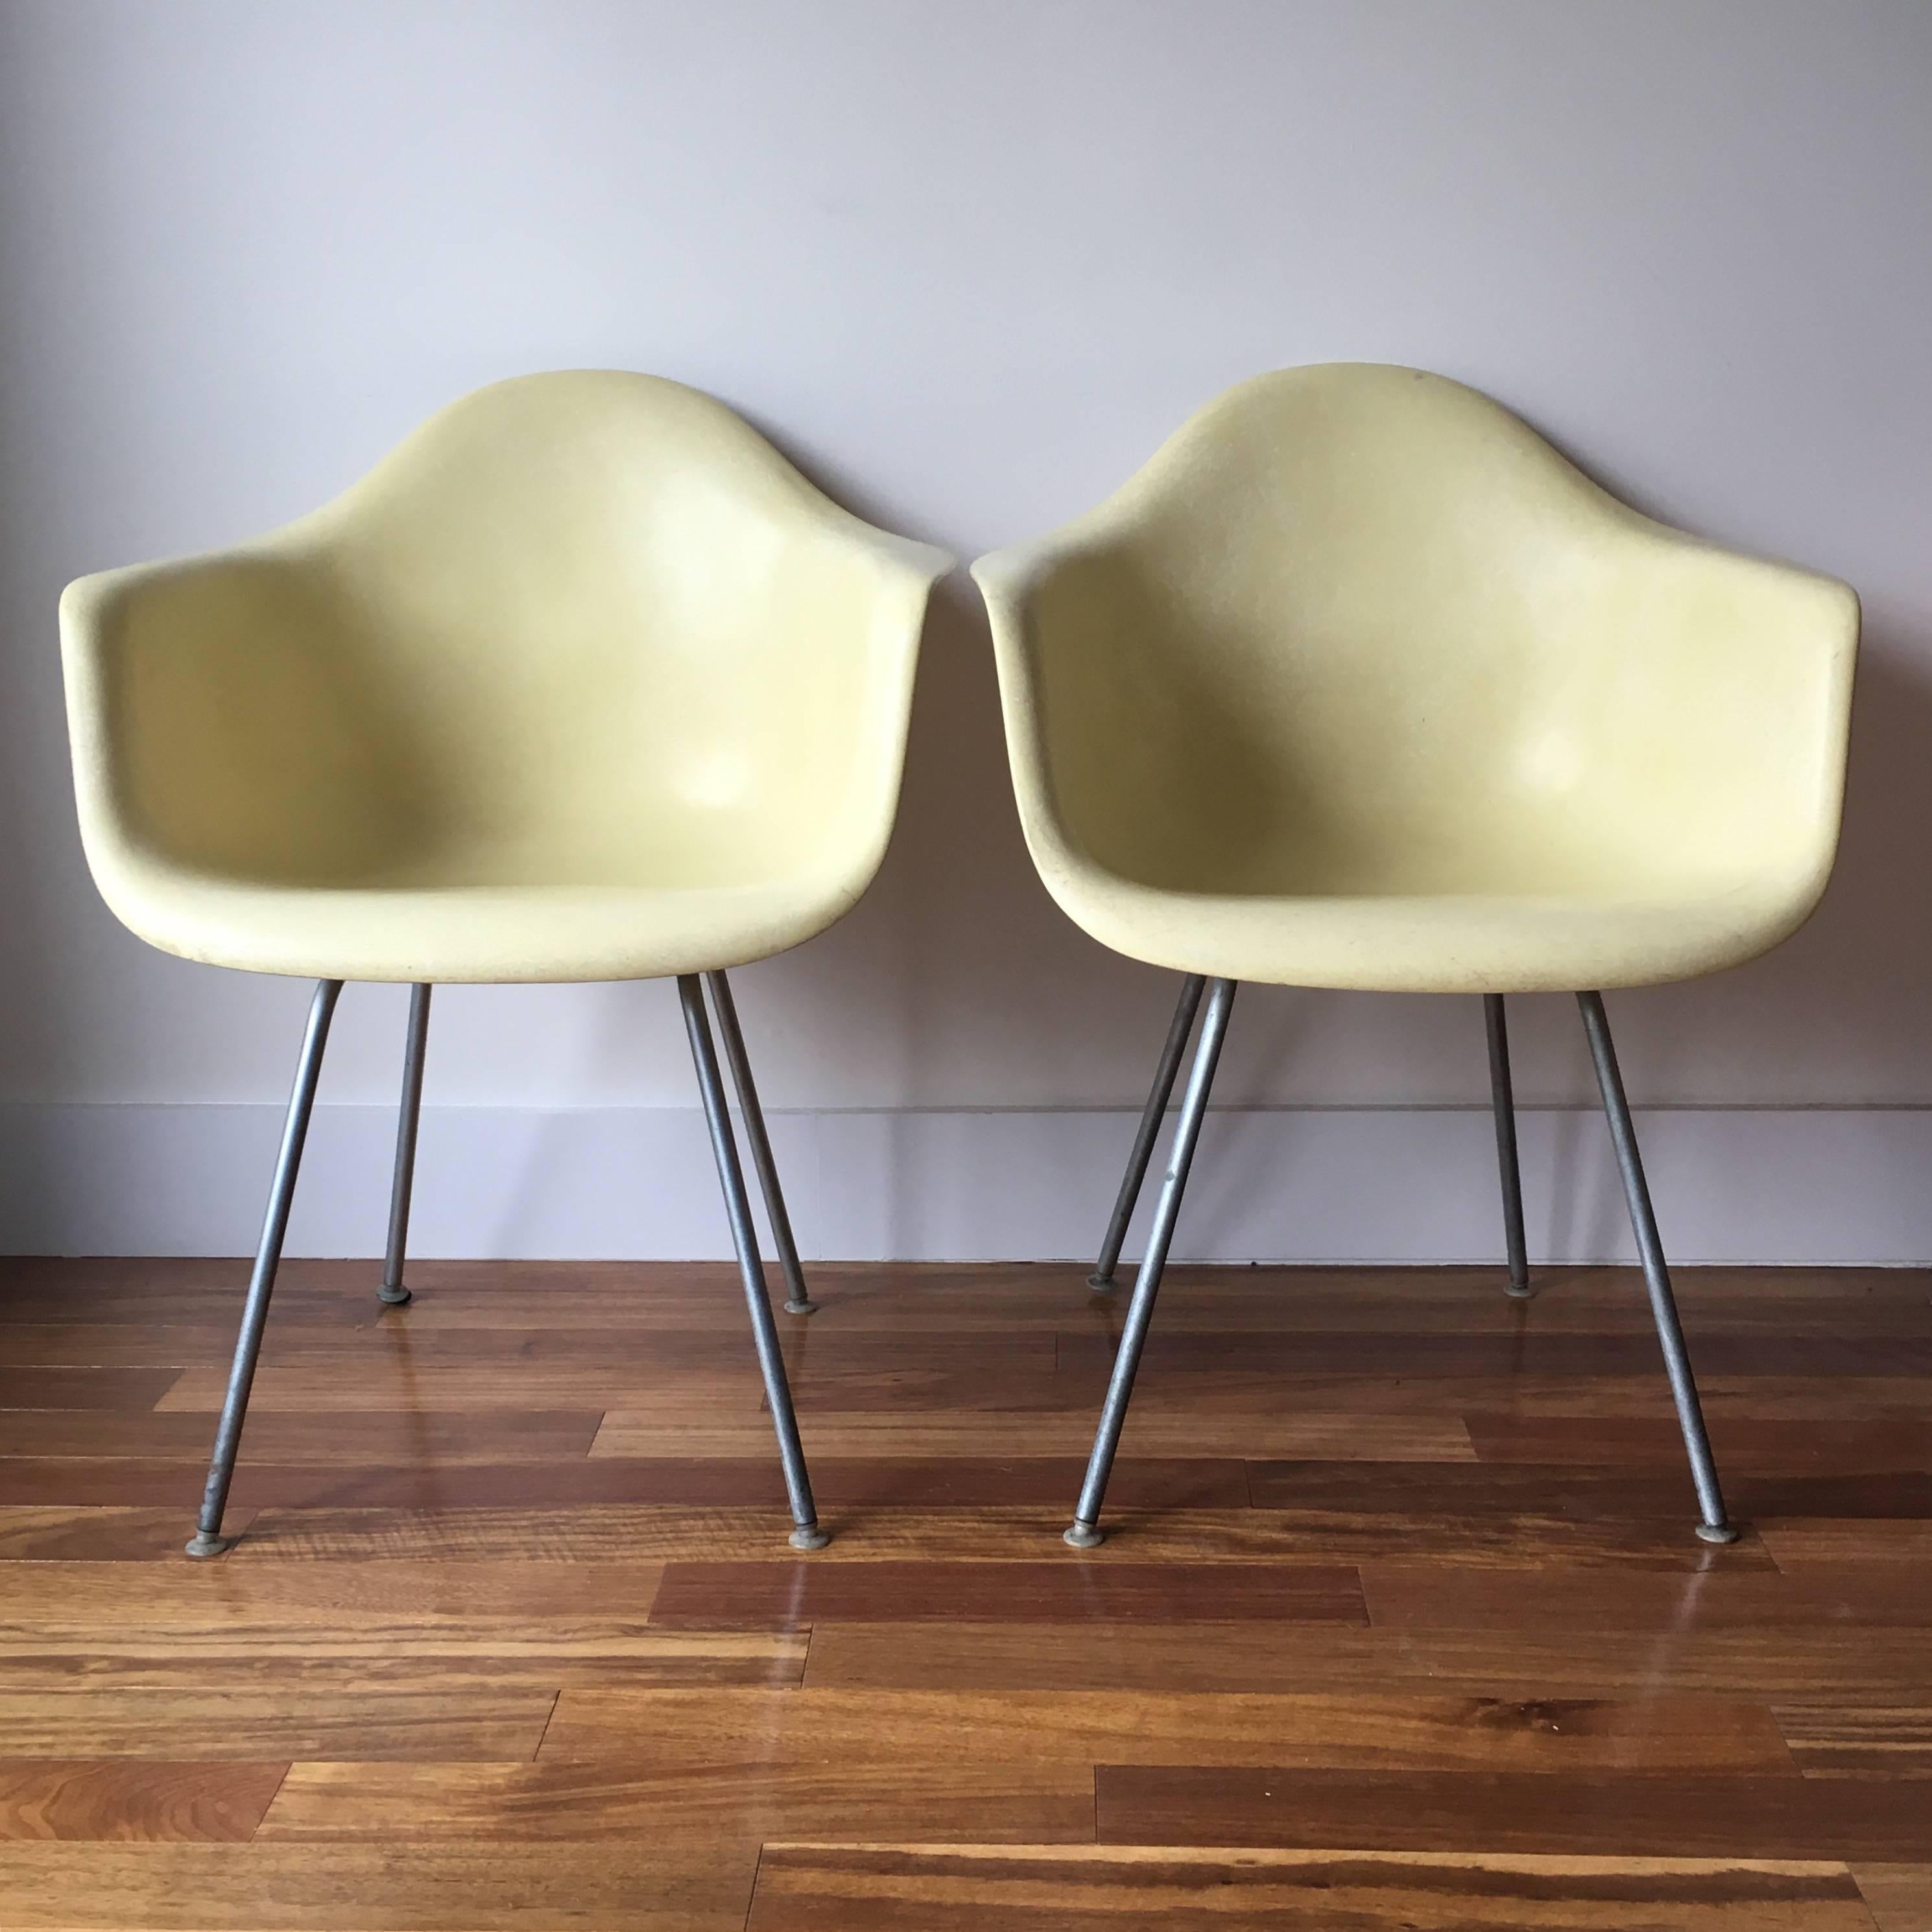 Two Herman Miller Eames DAX armchairs in parchment. Gorgeous buttery patina. No cracks or dings. In excellent condition. All glides present. All mounts tight. Mounts were reglued at some point. Early unmarked Zenith shells (from mid-1950s. Bases in